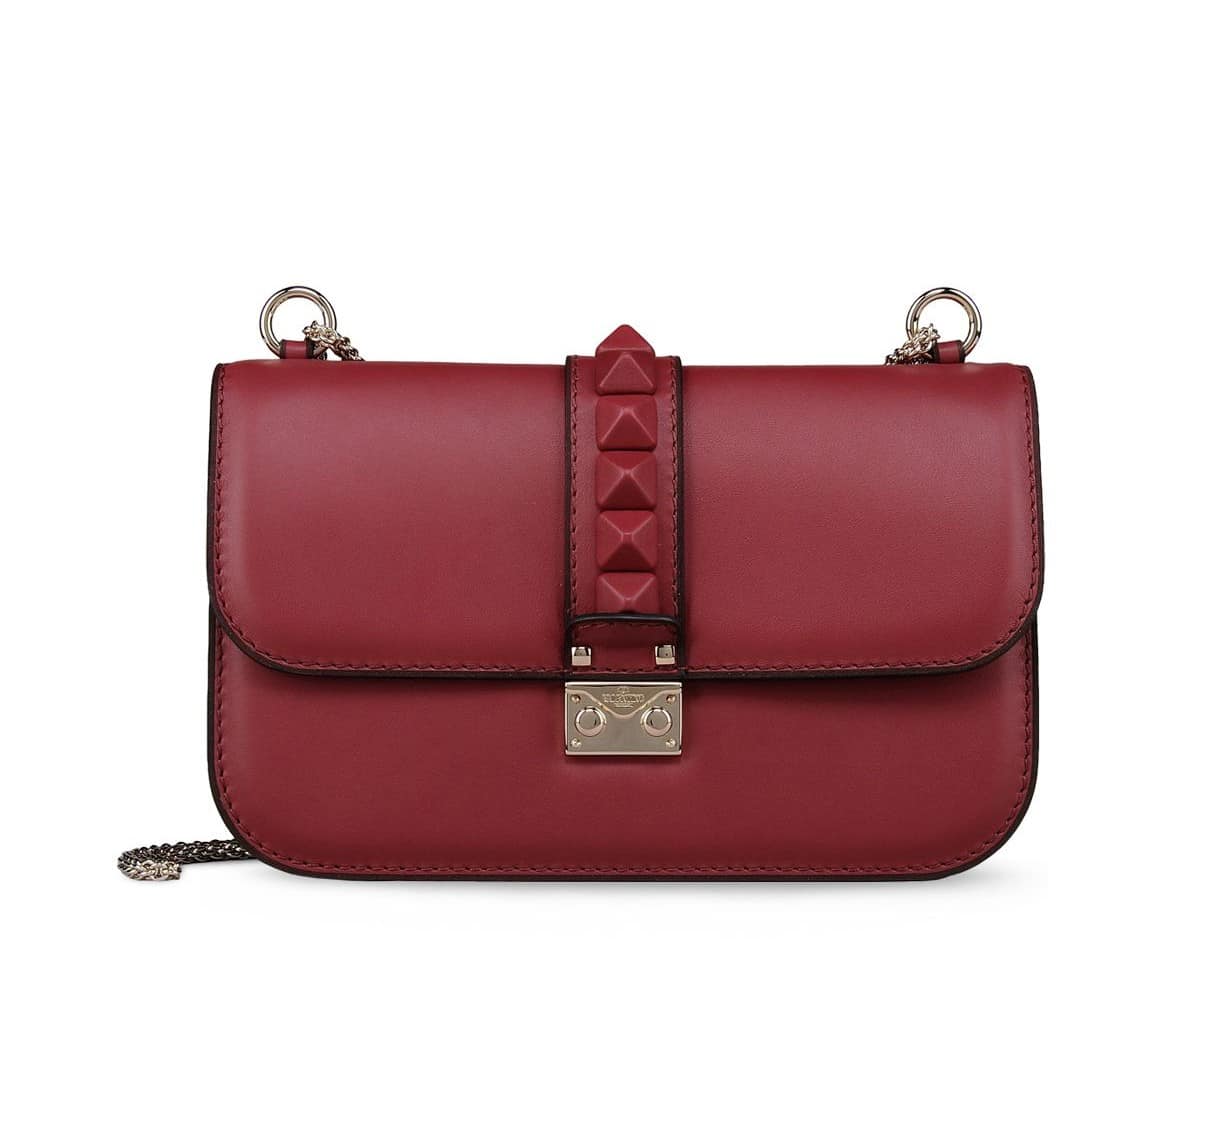 Valentino Rockstud Leather Covered Flap Bag - Prefall 2014